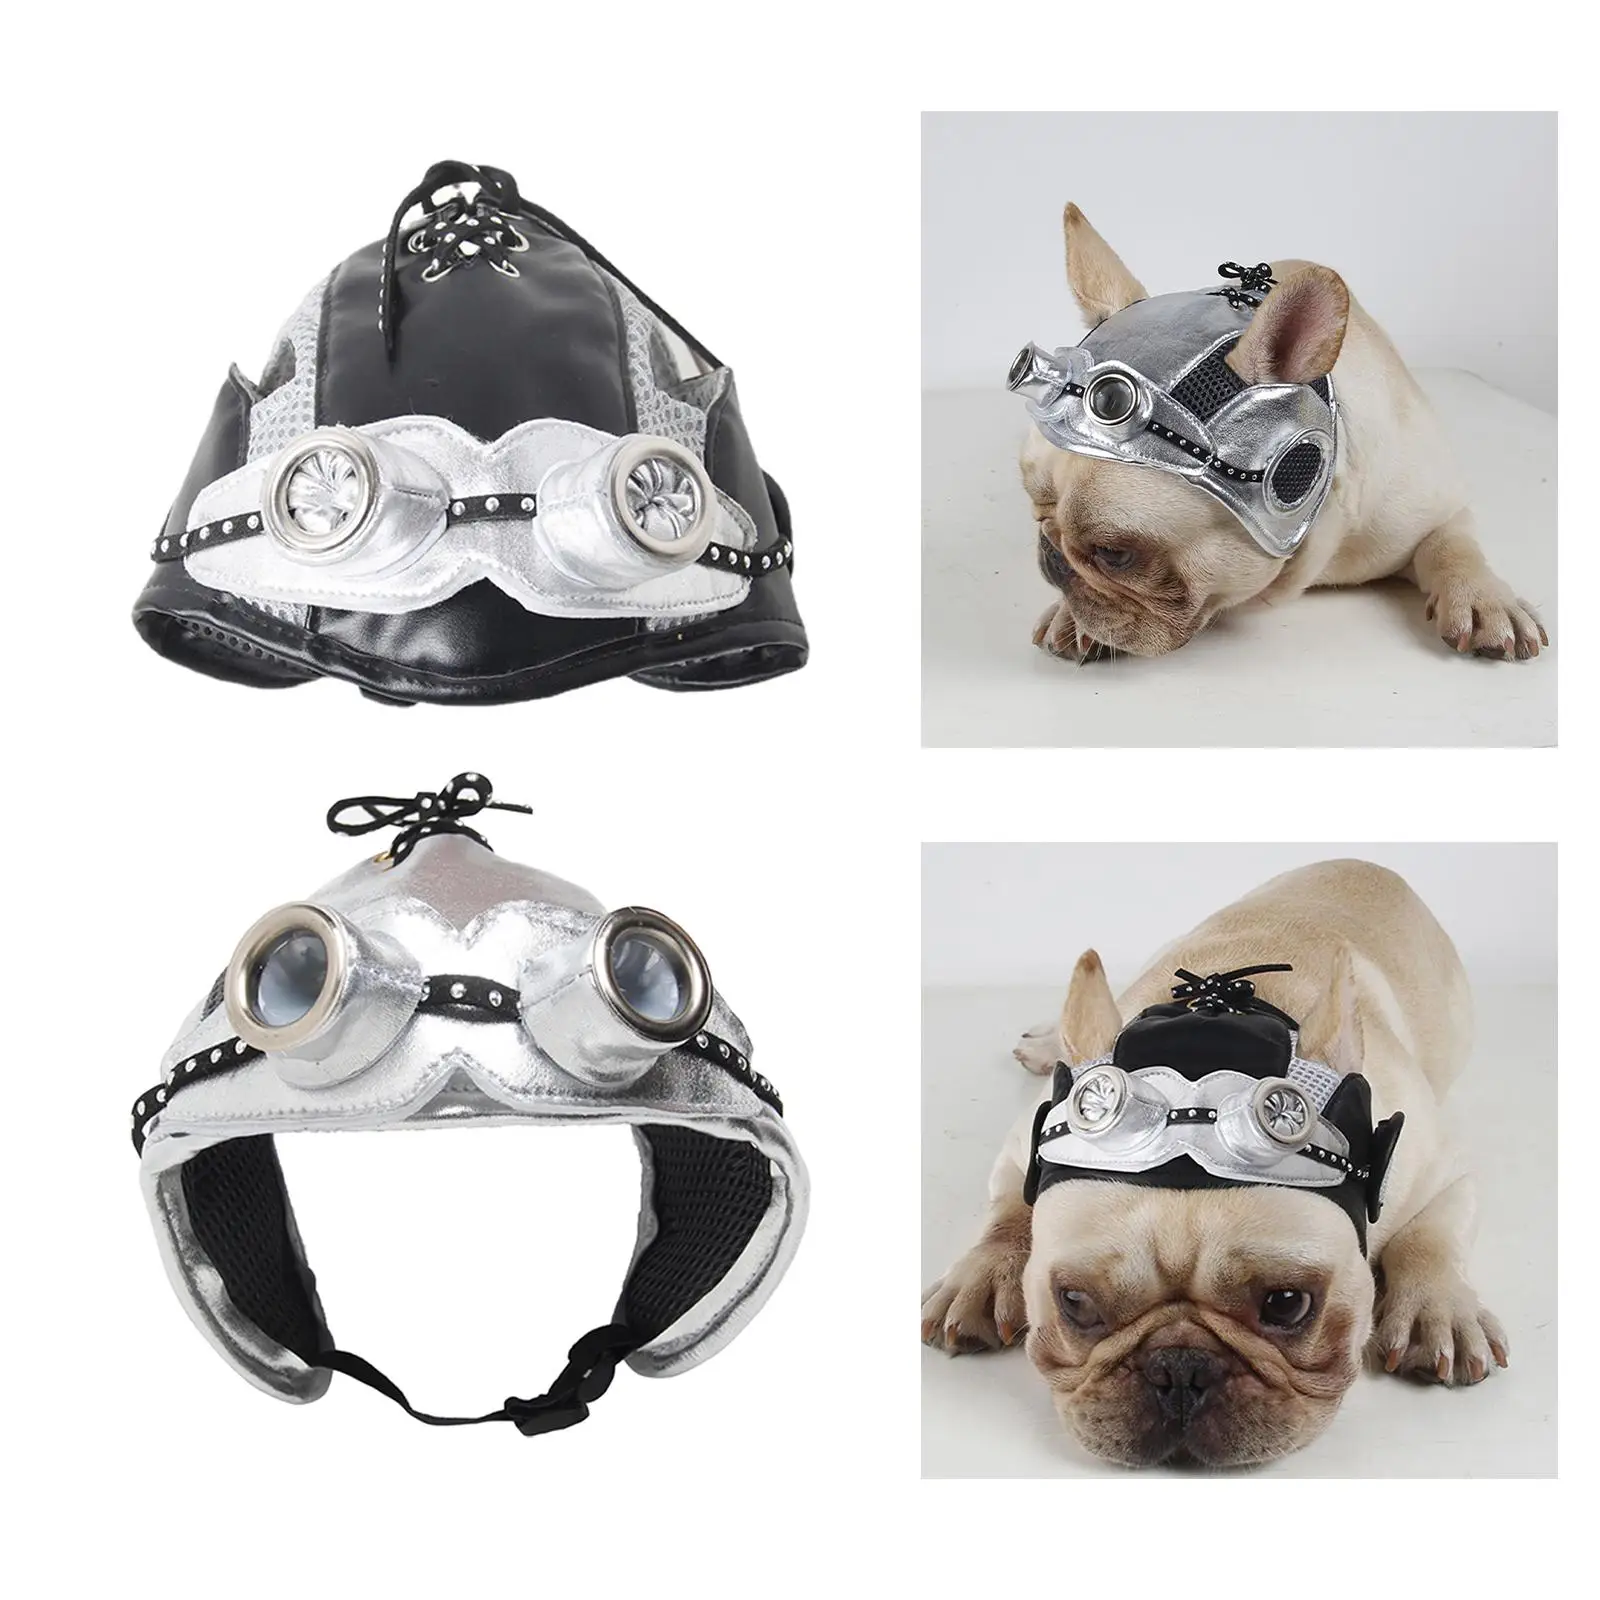 PU Leather Cute Dog Hat Halloween Costume Windproof Accessory Dress up Birthday Gift for Animal Puppy Photo